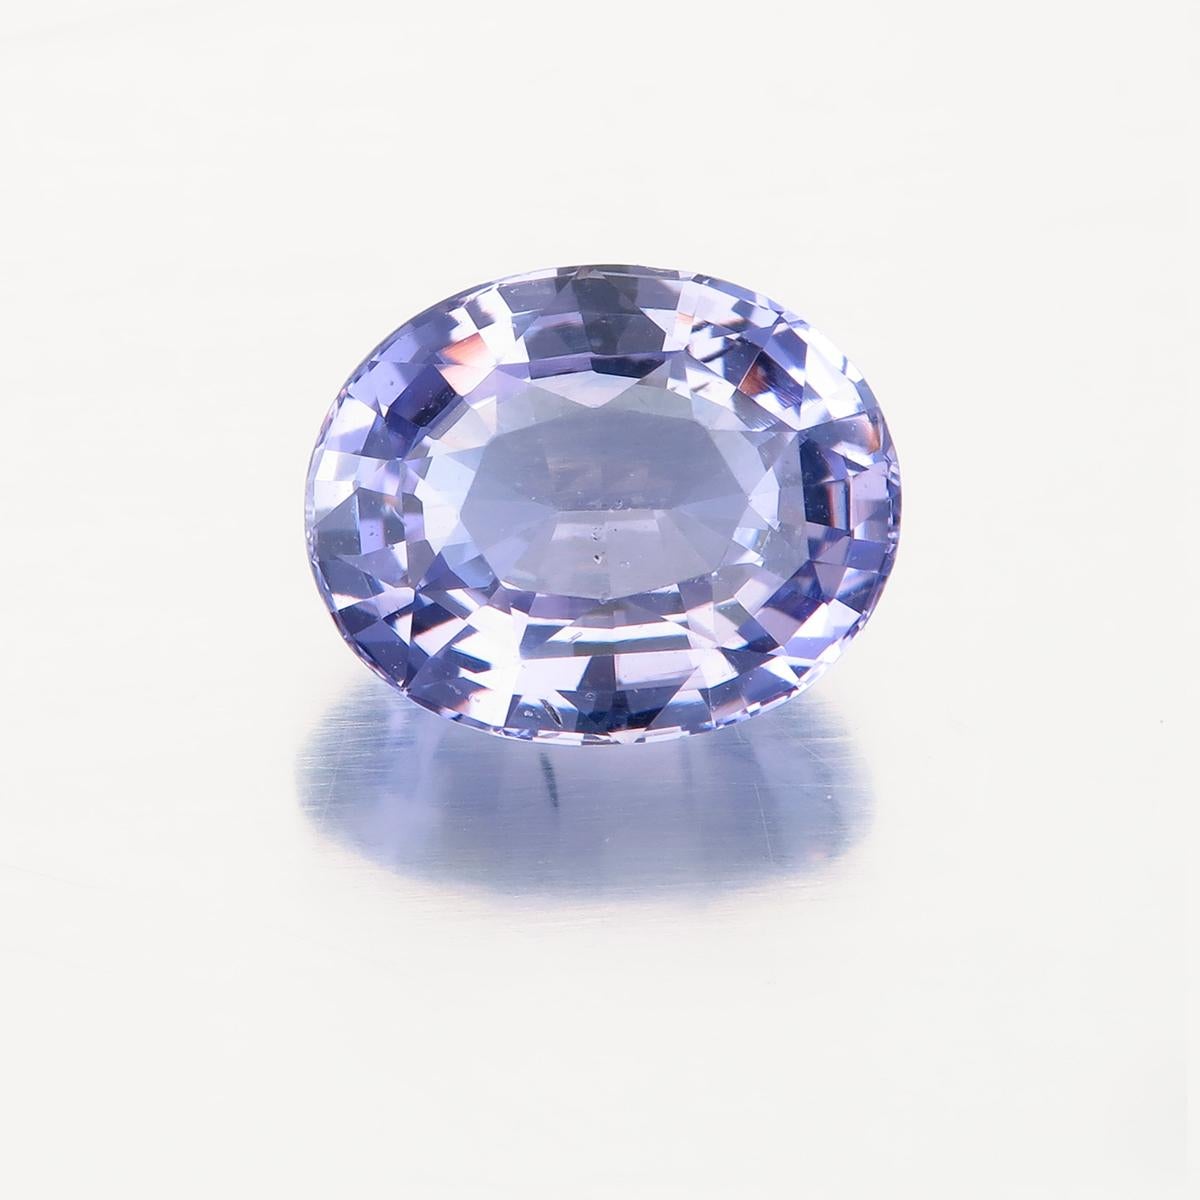 2.14 Carat Violet Spinel from Sri Lanka ( Ceylon)
Shape: Oval
Cutting Style: Faceted Crown: Modified Brilliant. Pavilion: Step
Color Violet with medium saturation and a Medium-Light tone
Dimensions: 8.84 x 7.12 x 4.35 mm
Weight: 2.14 Carat
No